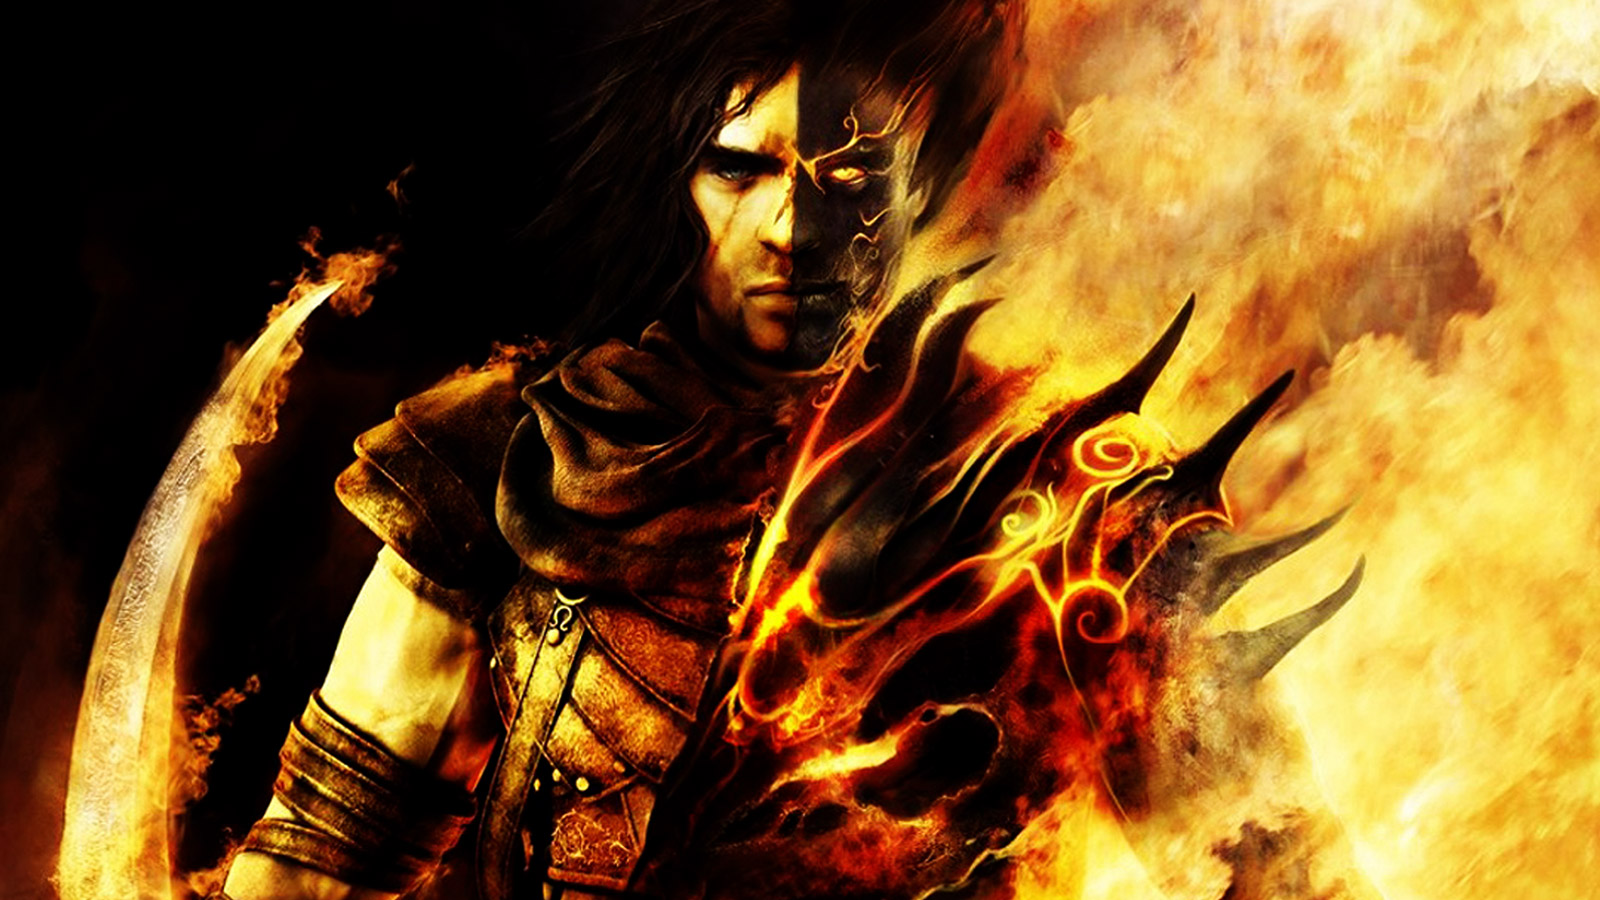 Prince Of Persia The Two Thrones Wallpaper In